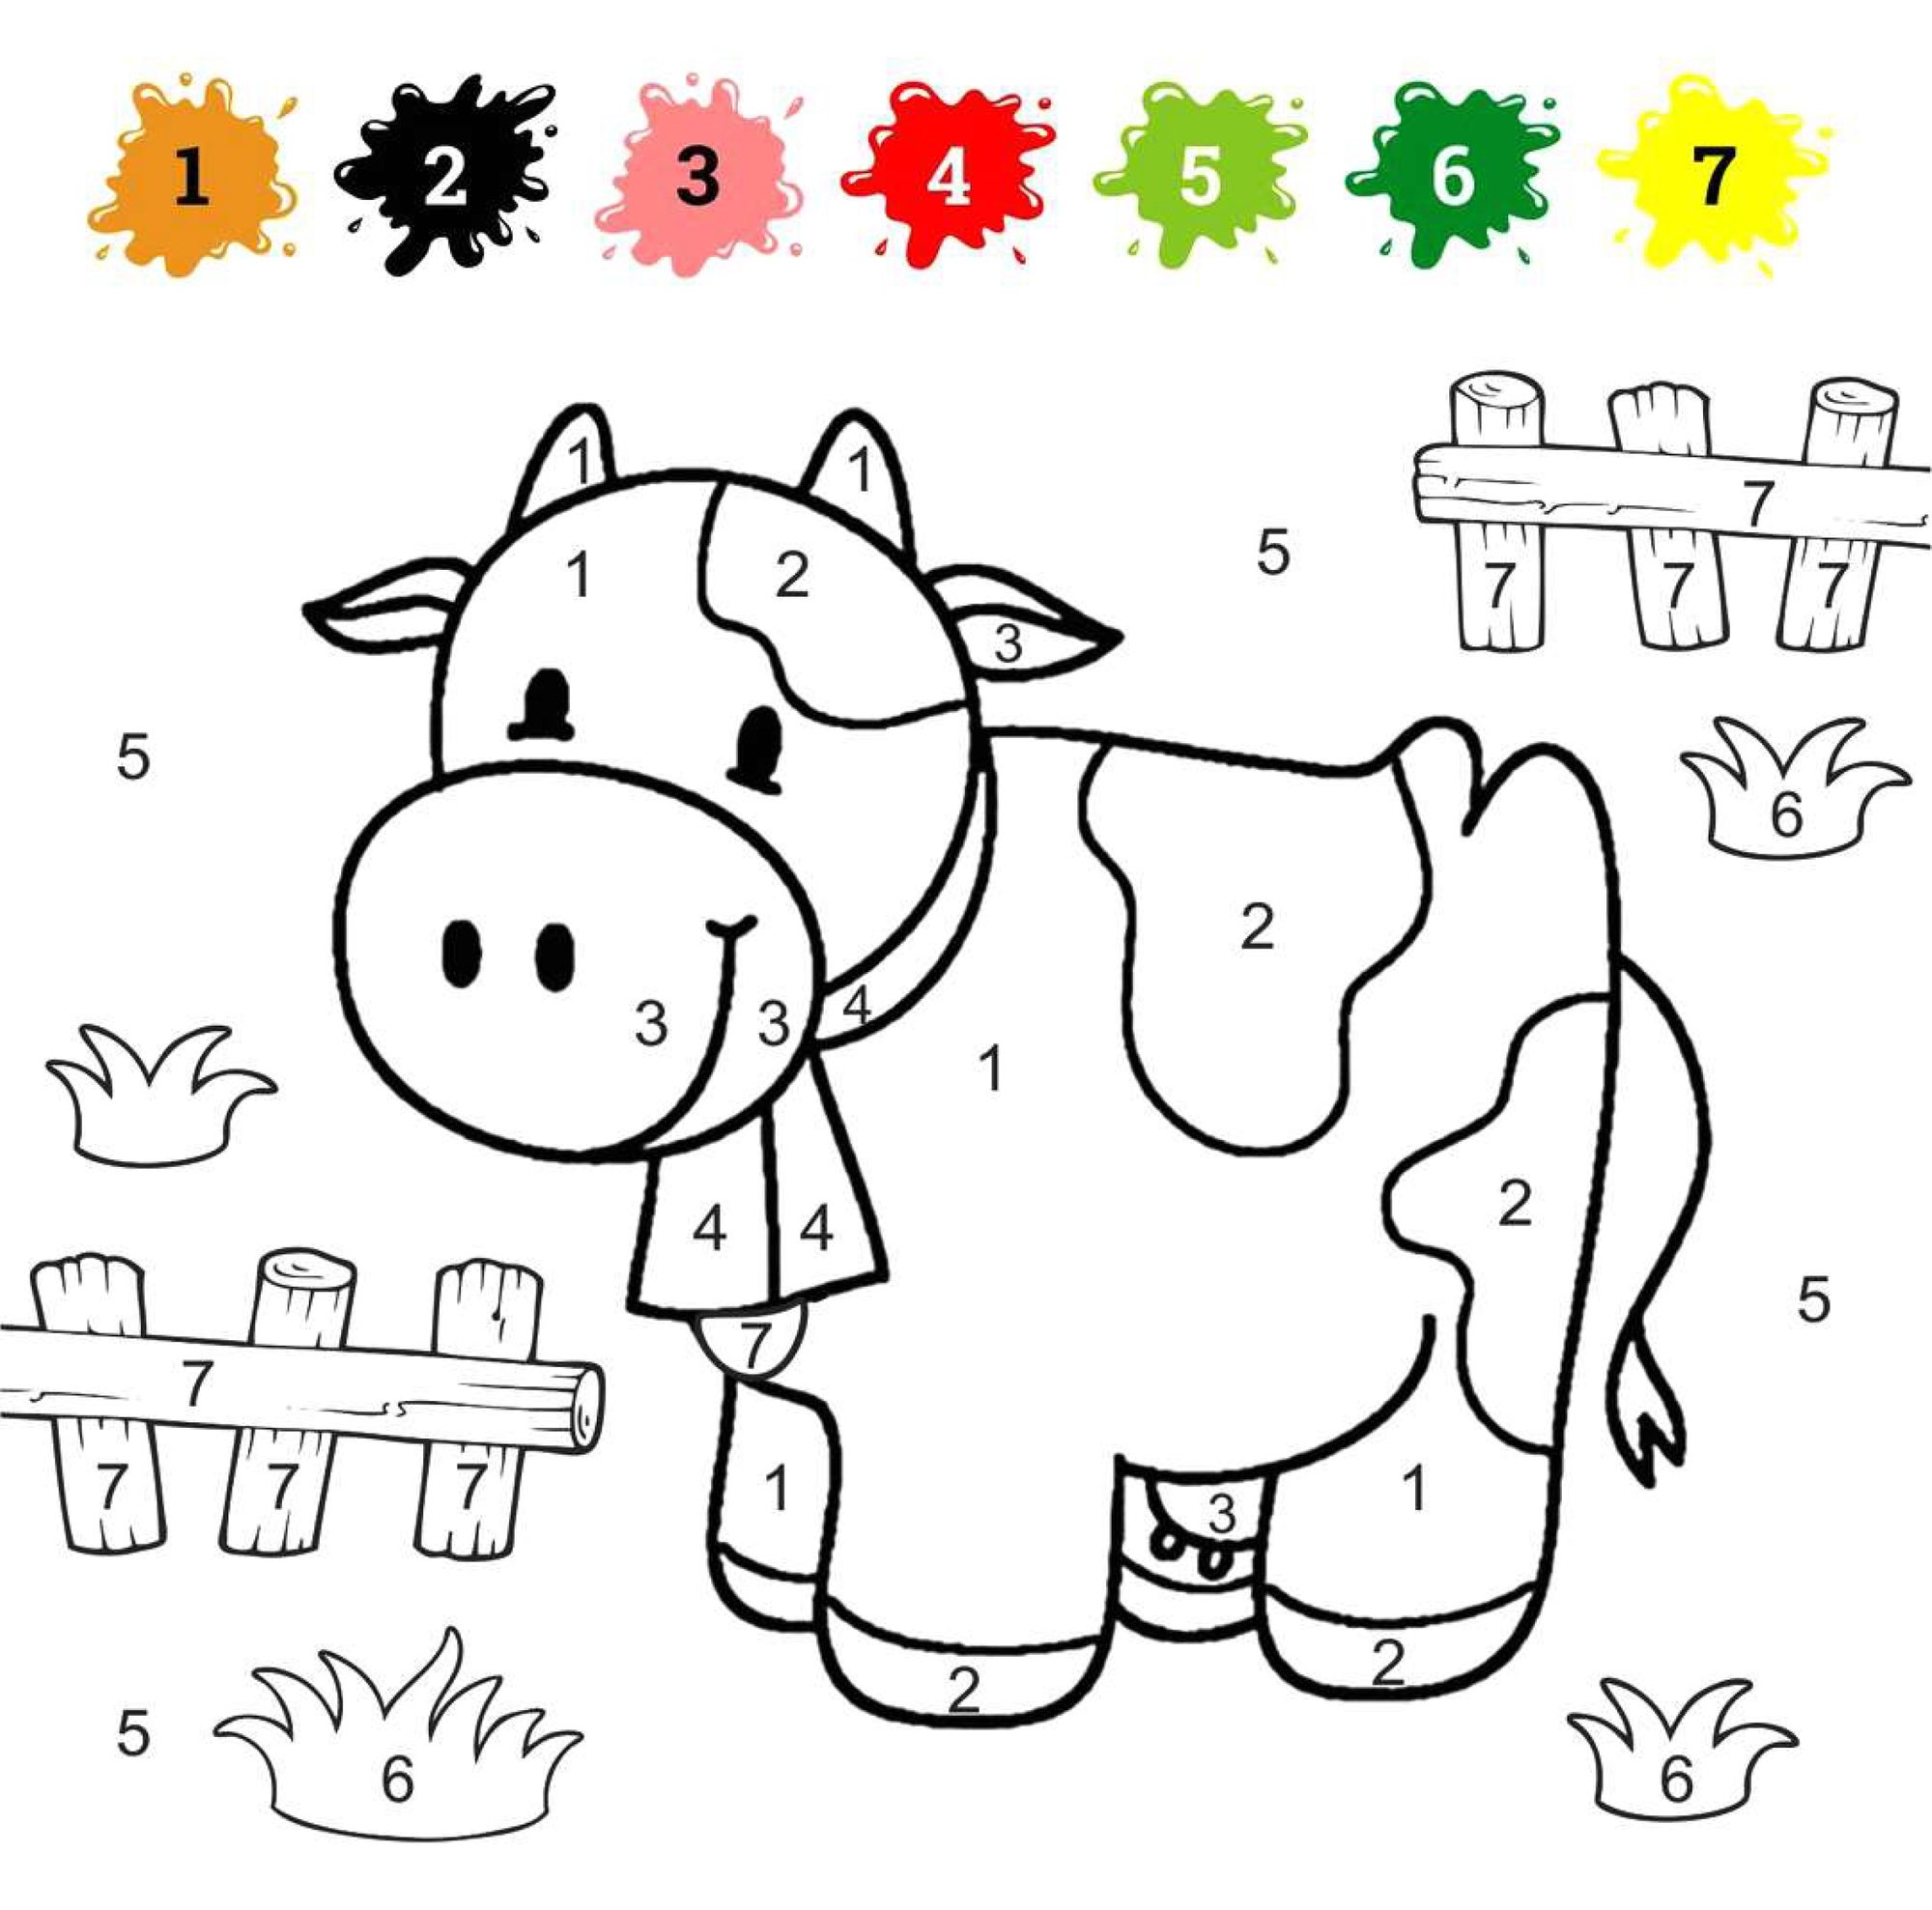 free-printable-color-by-number-coloring-pages-best-coloring-pages-for